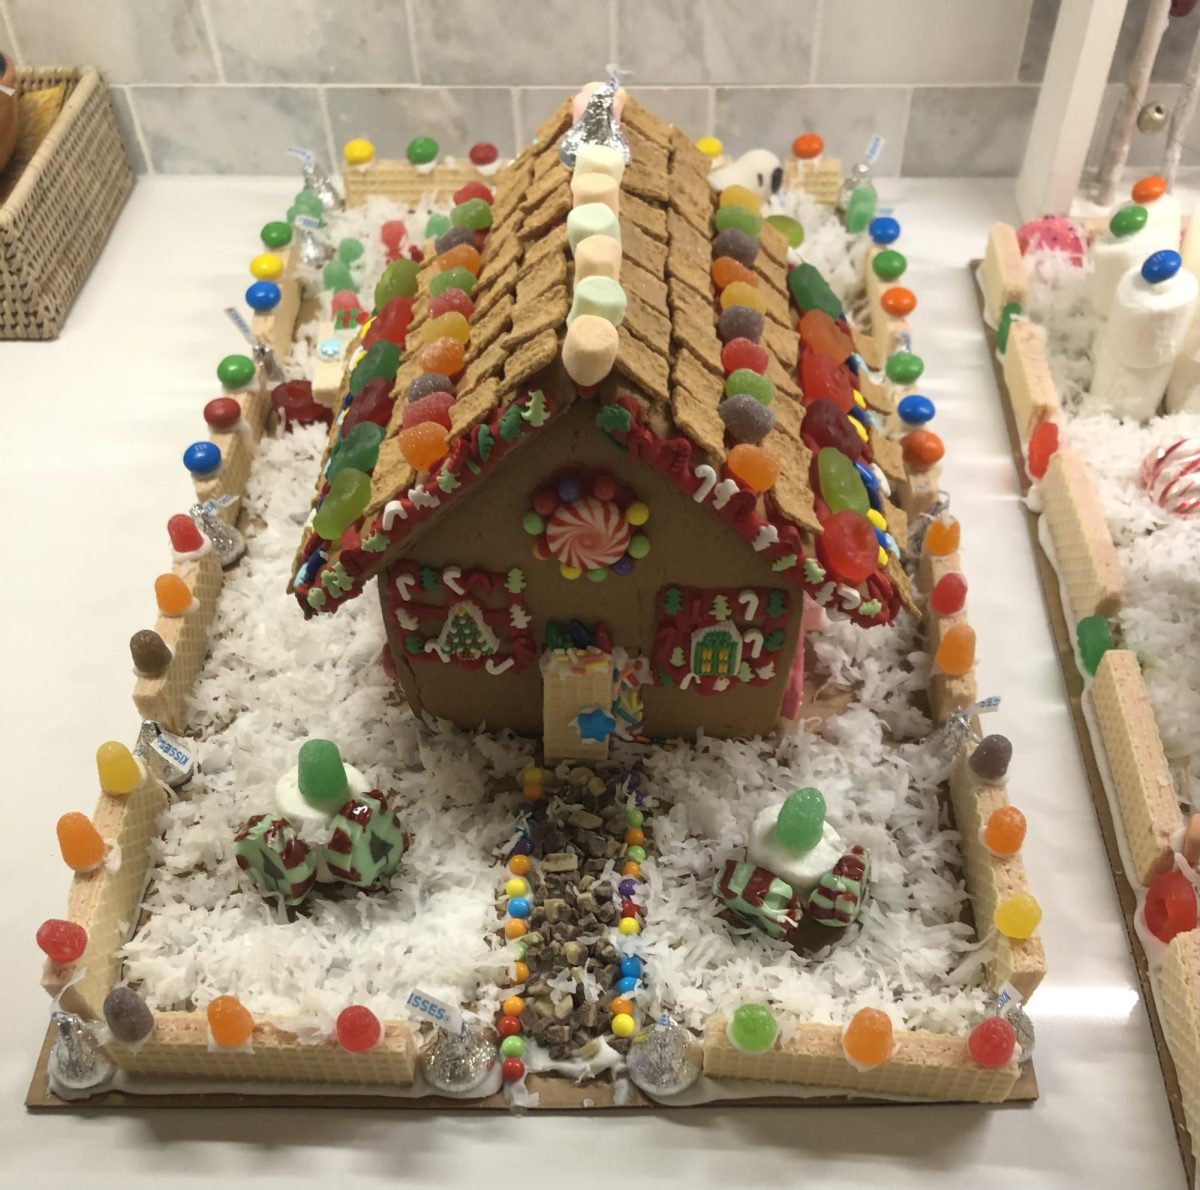 Another cereal that works well for gingerbread houses is Golden Grahams which are added to be a more traditional shingle-looking roof along with Lifesavers, gumdrops, marshmallows and a Hershey’s Kiss chimney.